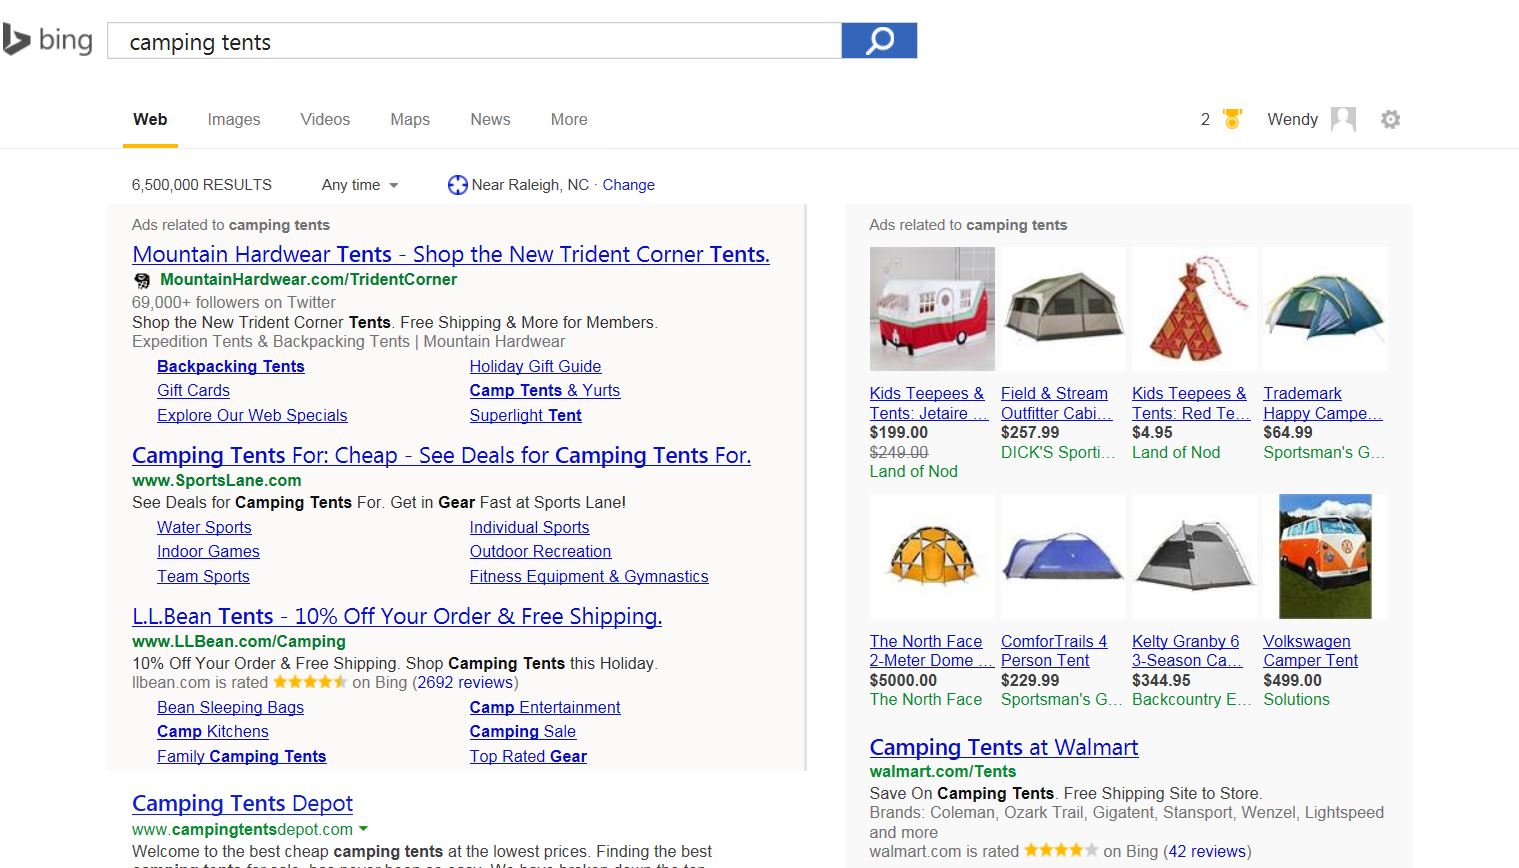 5 Easy Ways to Make the Most Out of Bing Ads - ROI Revolution
